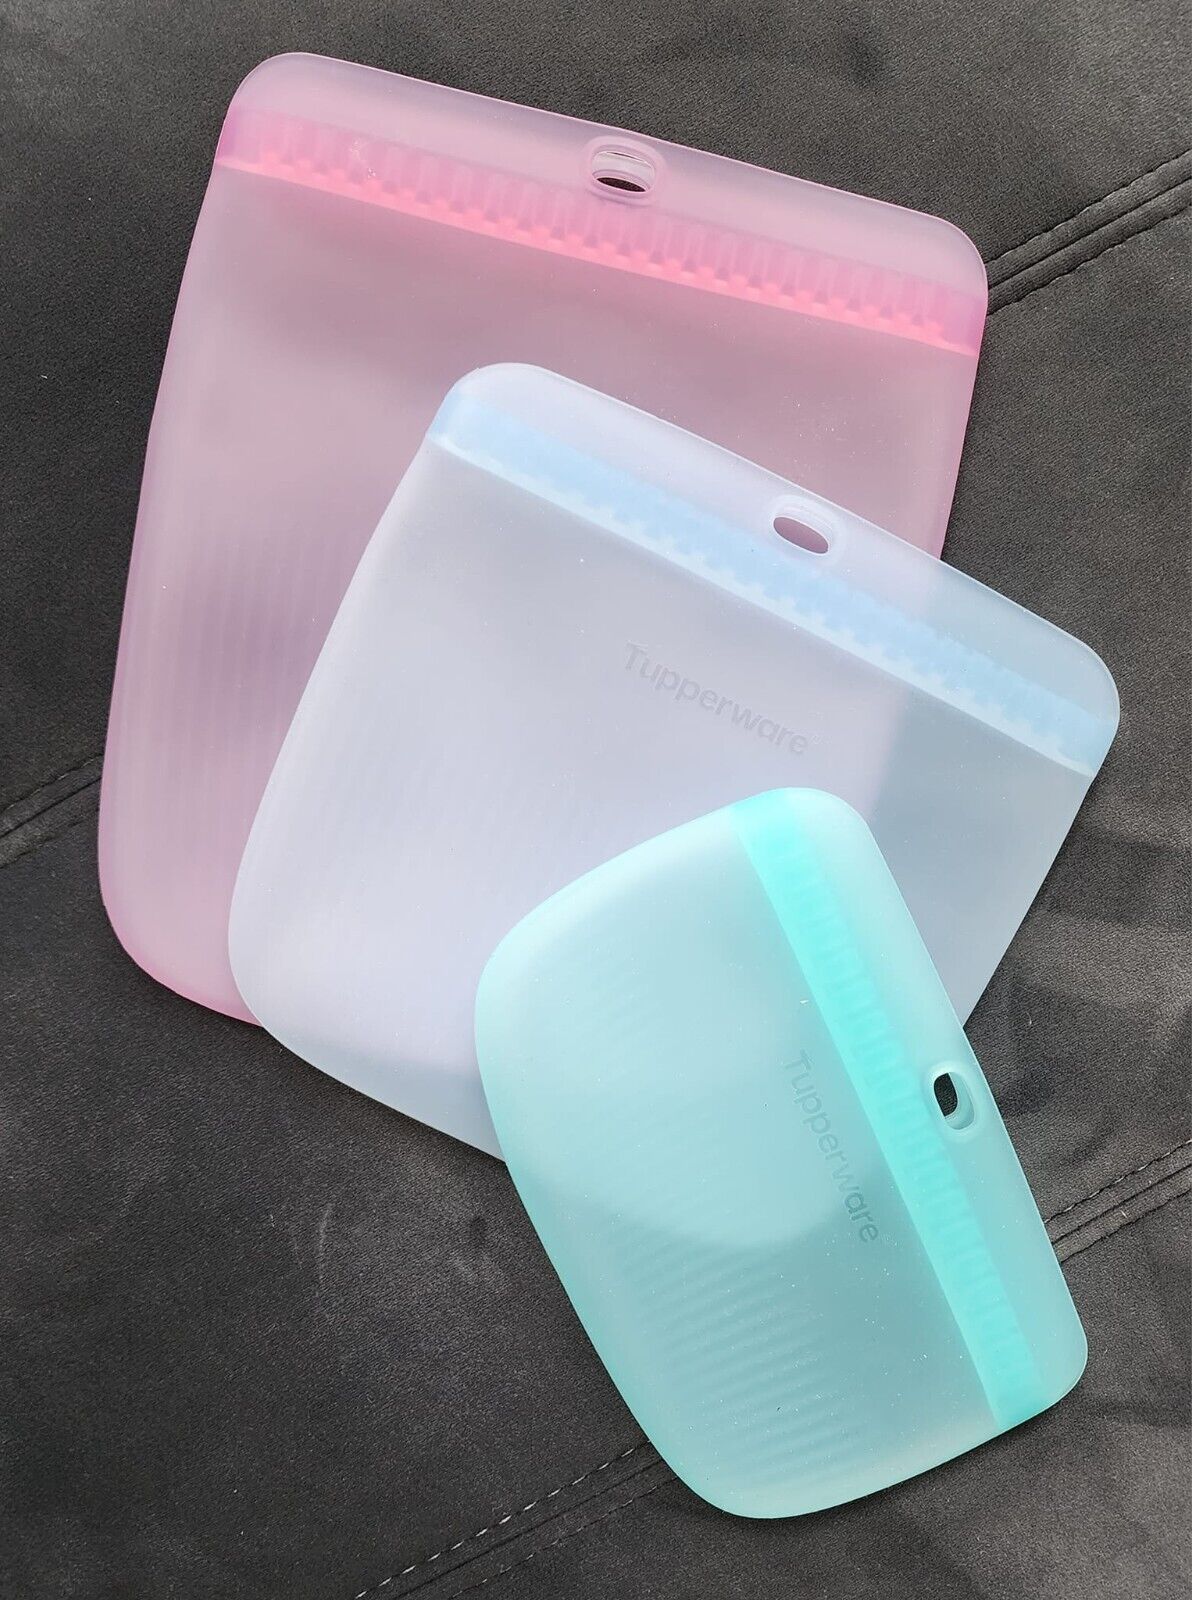 NEW Tupperware Ultimate Slim Silicone Bags - Freezer Safe